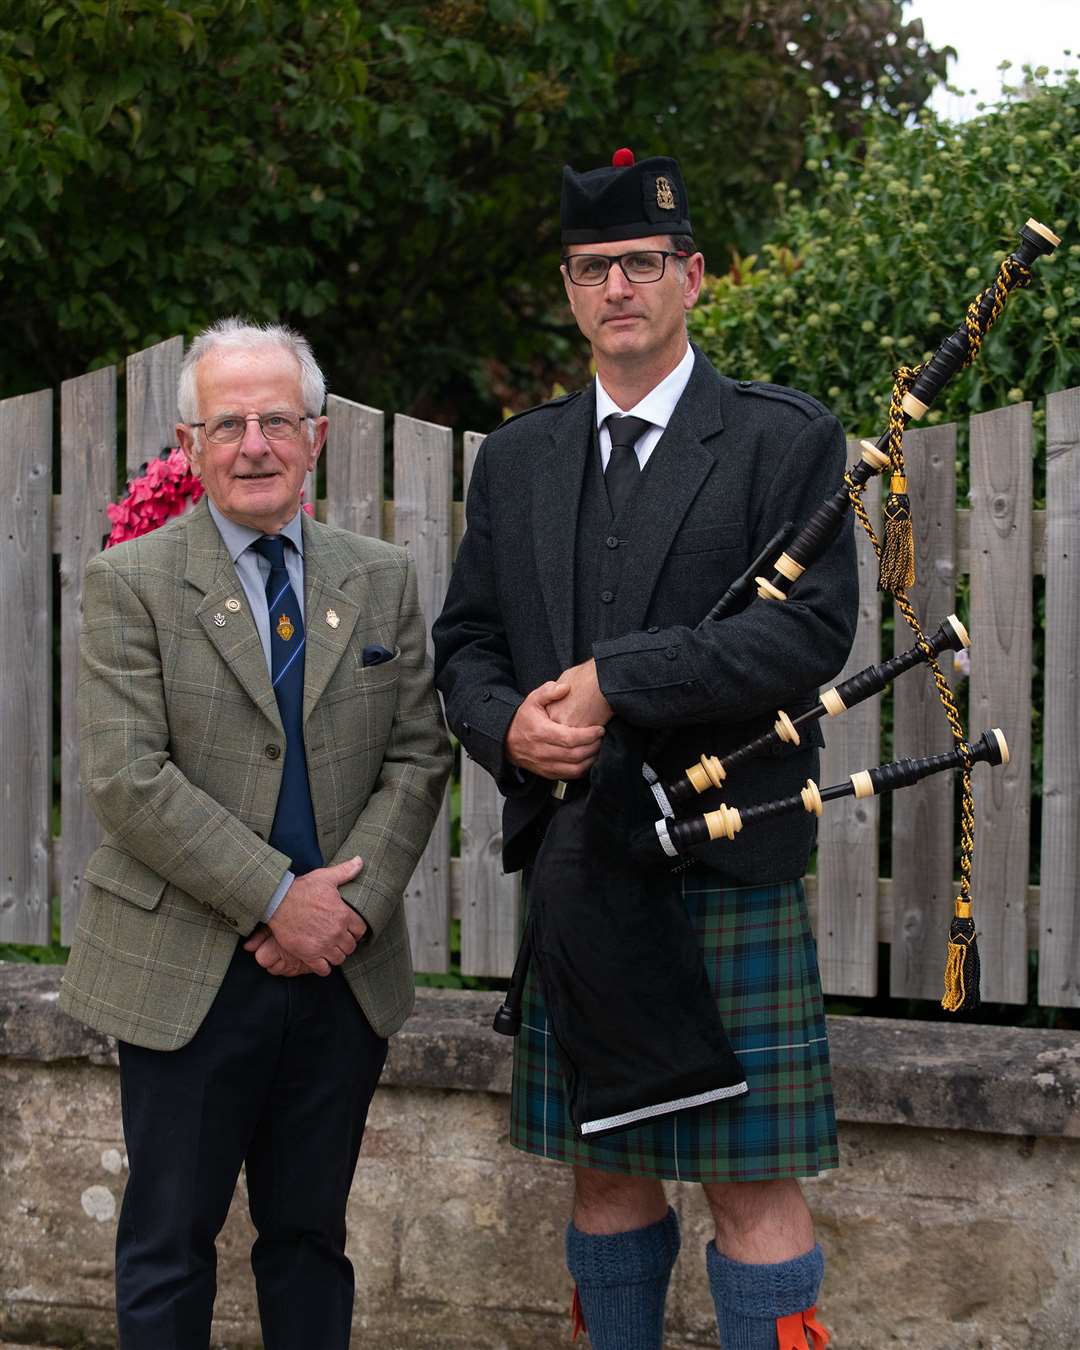 New Pipe Major Kevin Reid with Nairn Royal British Legion President Bob Towns who called the meeting over concerns about the band's future.